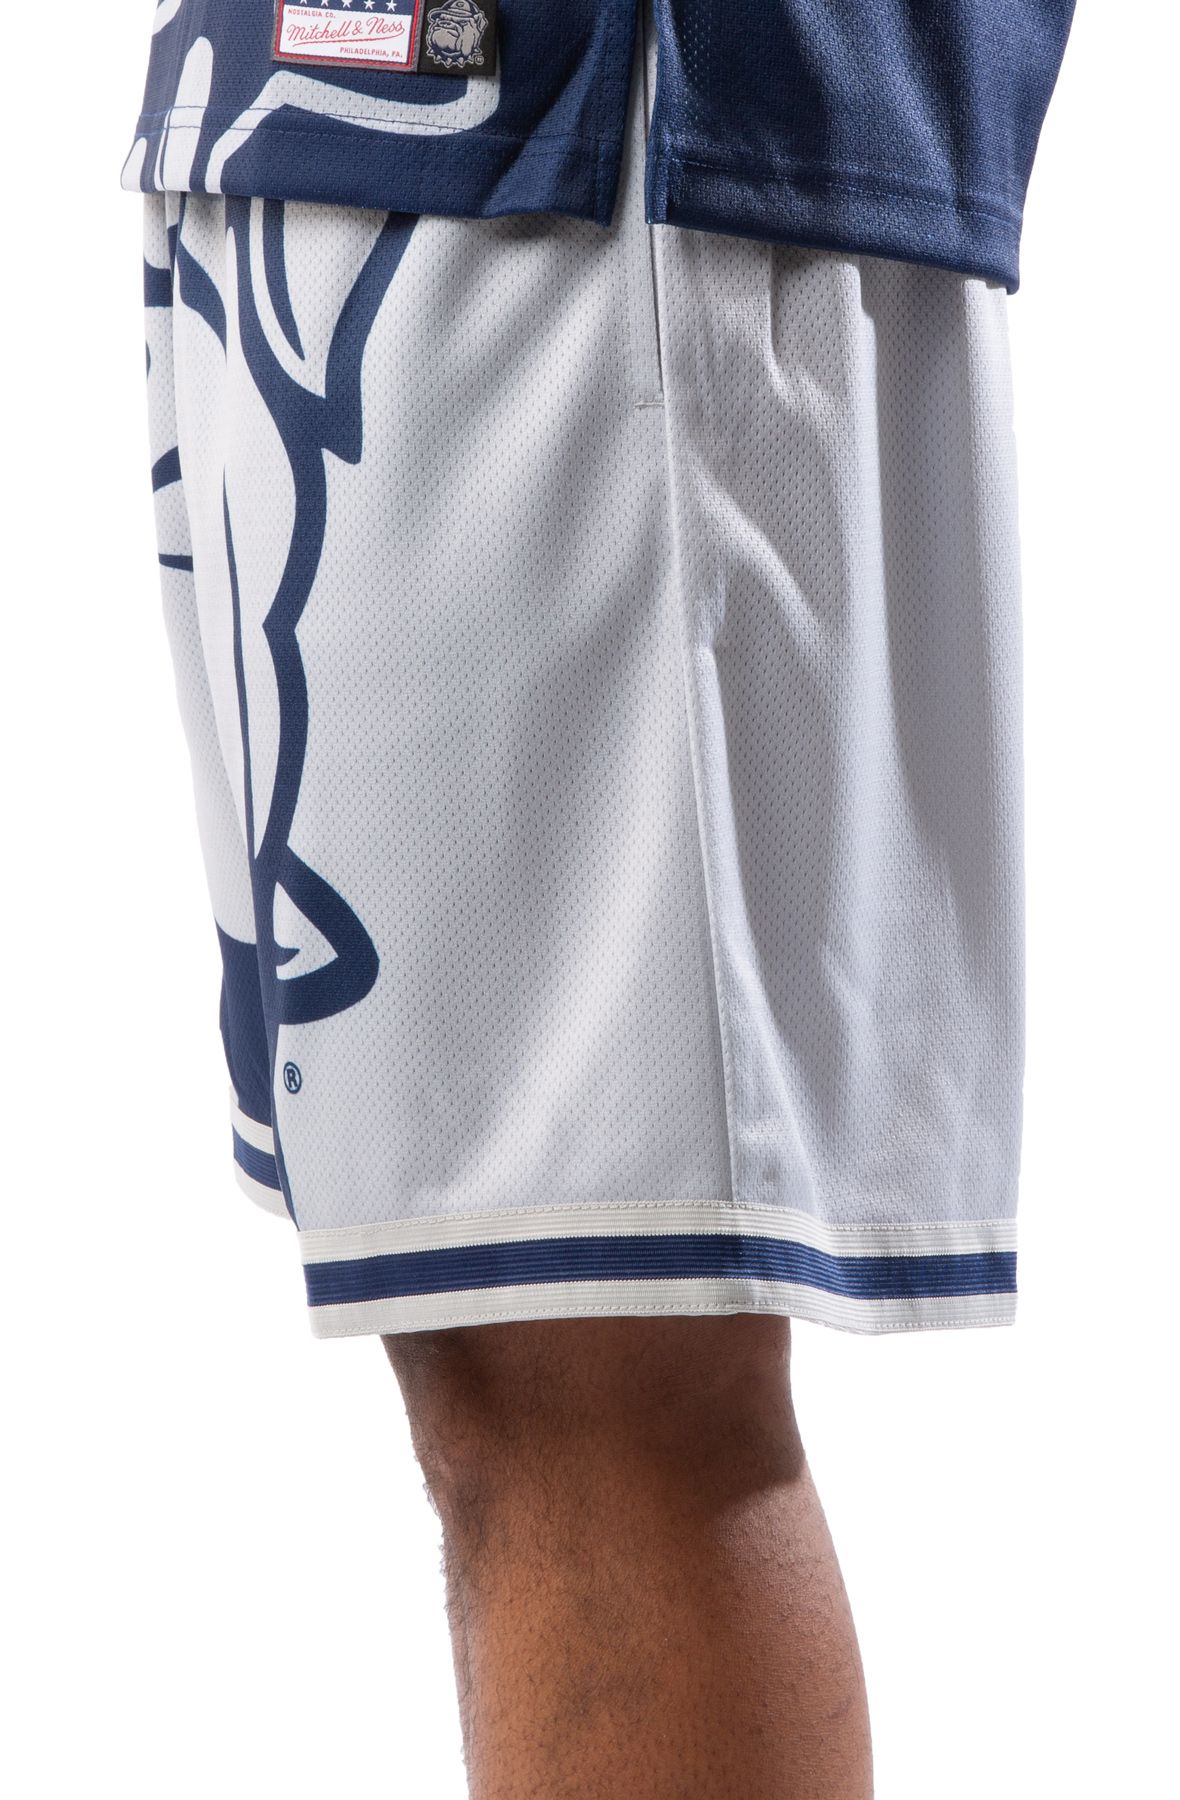 MITCHELL AND NESS Georgetown University Shorts PSHR3213-GTWYYPPPGREY ...